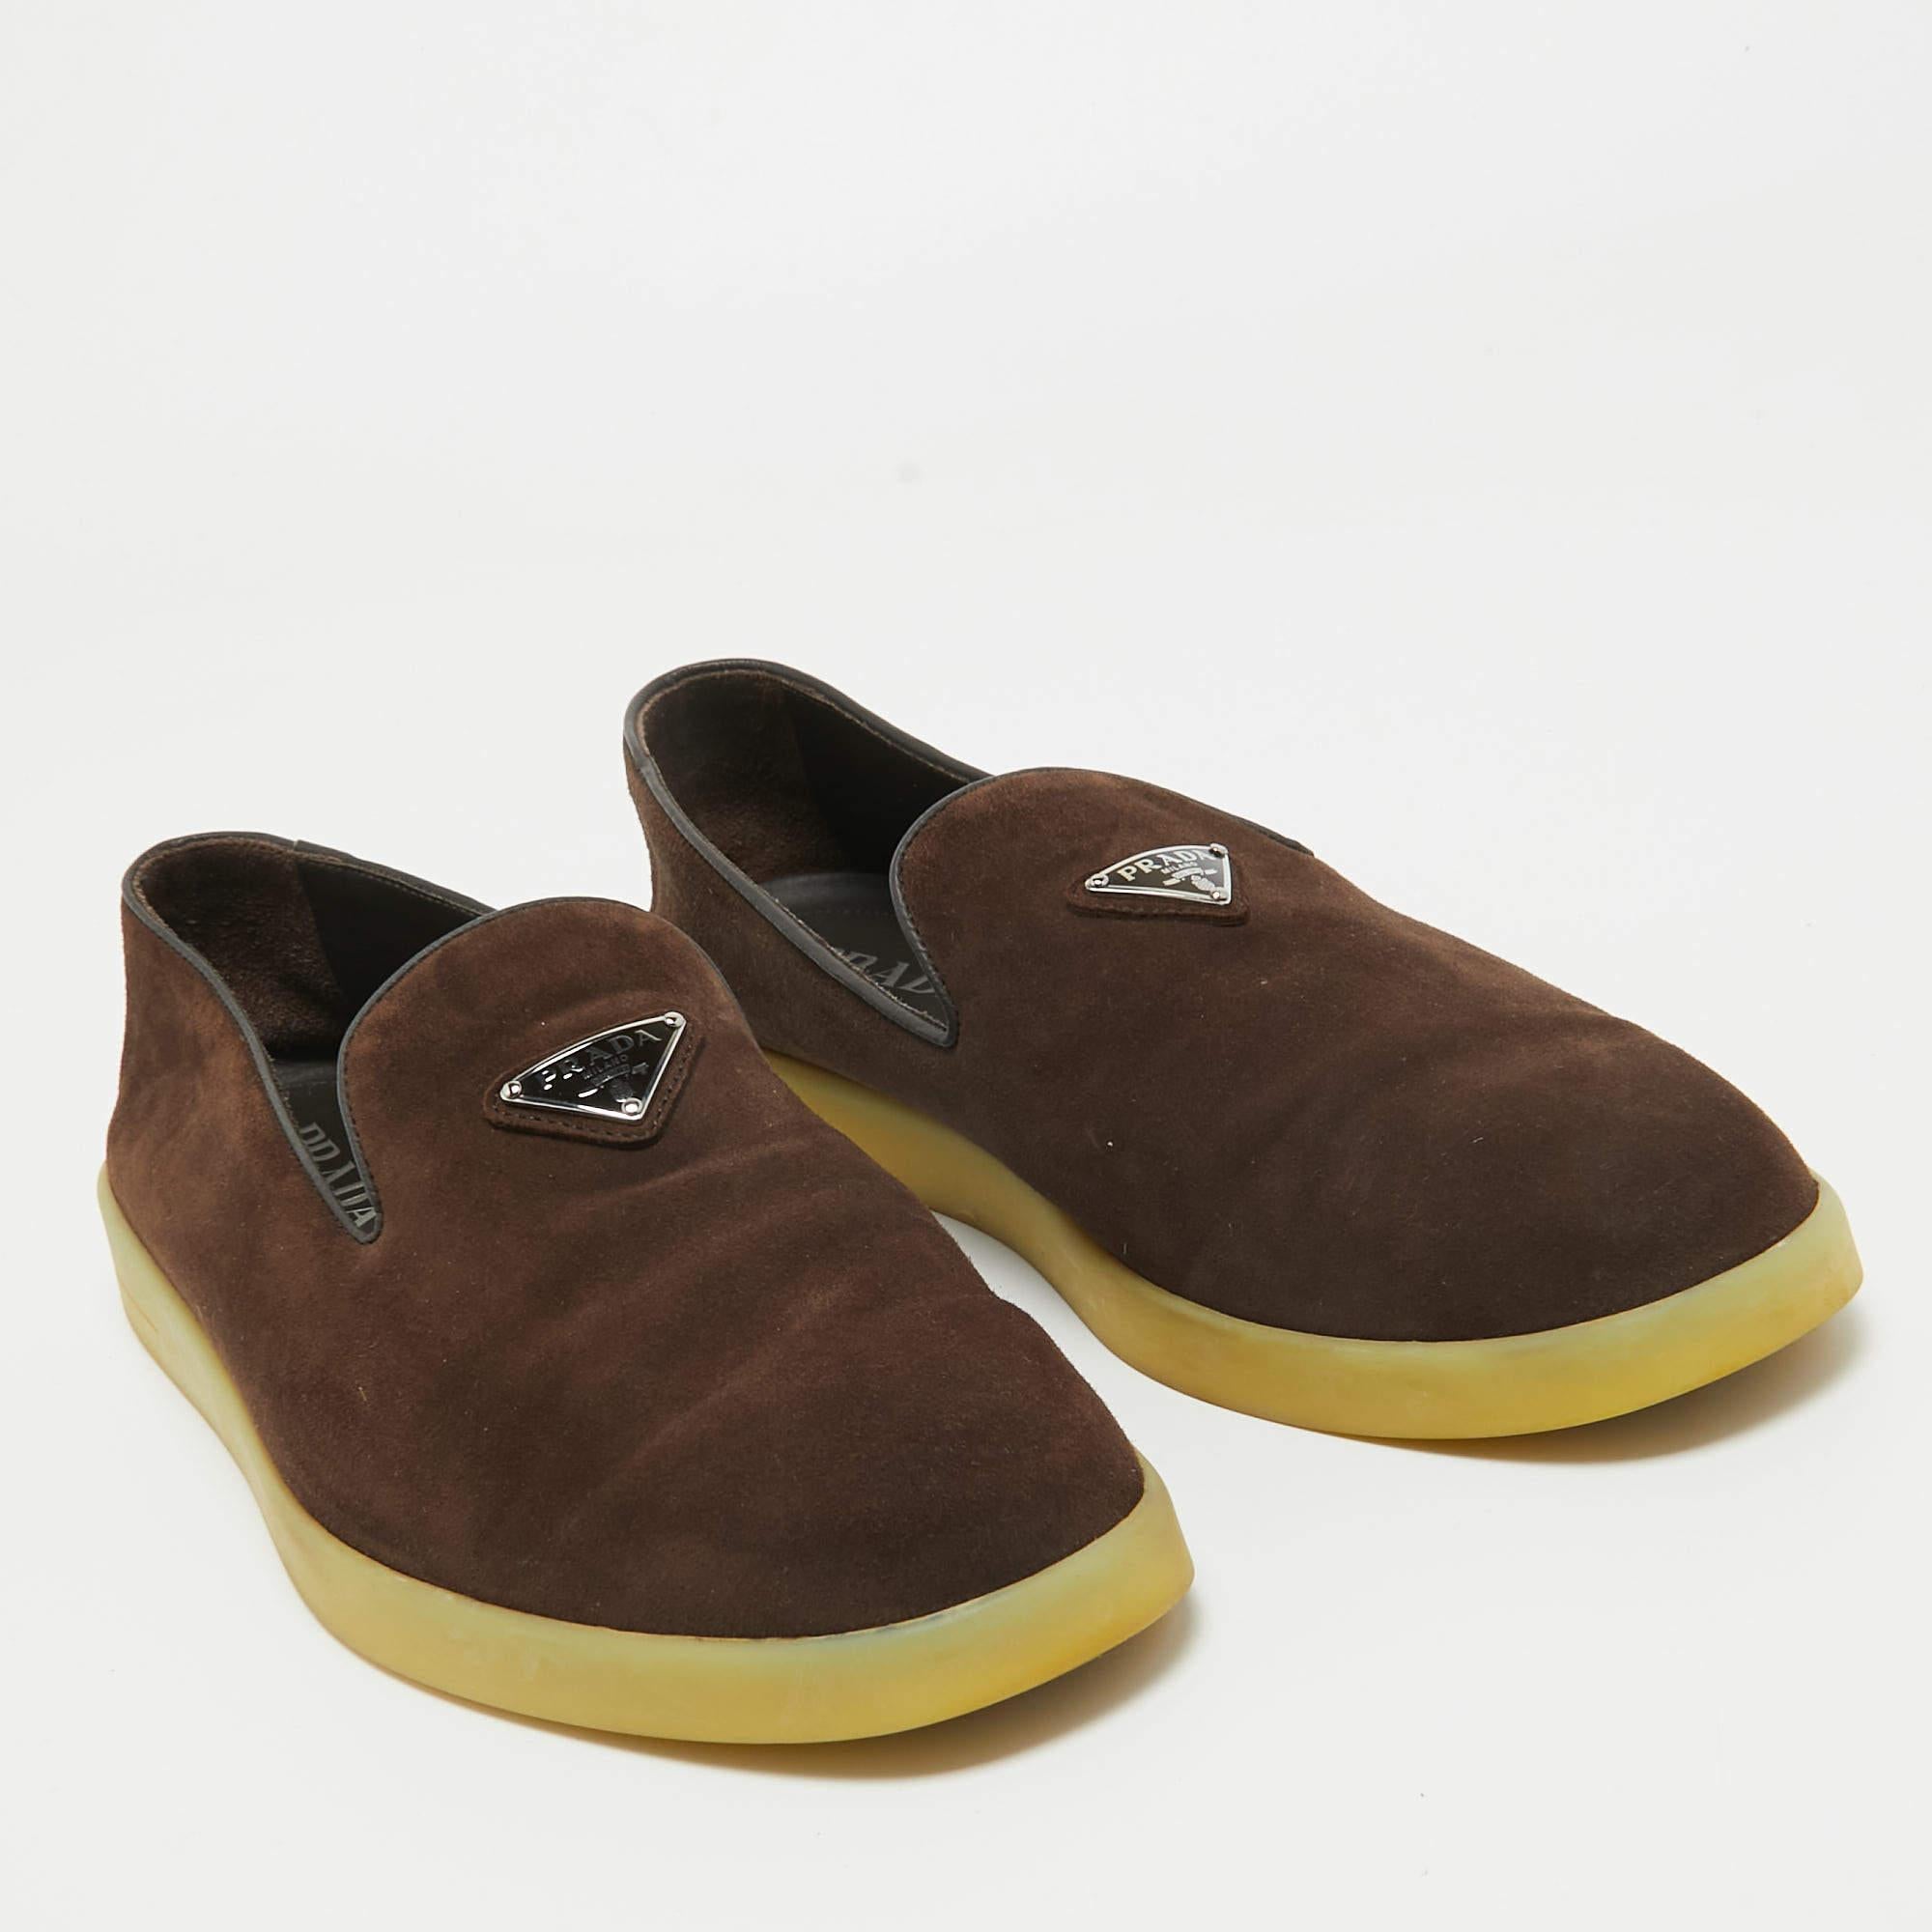 Prada Brown Suede Slip On Loafers Size 42 For Sale 3